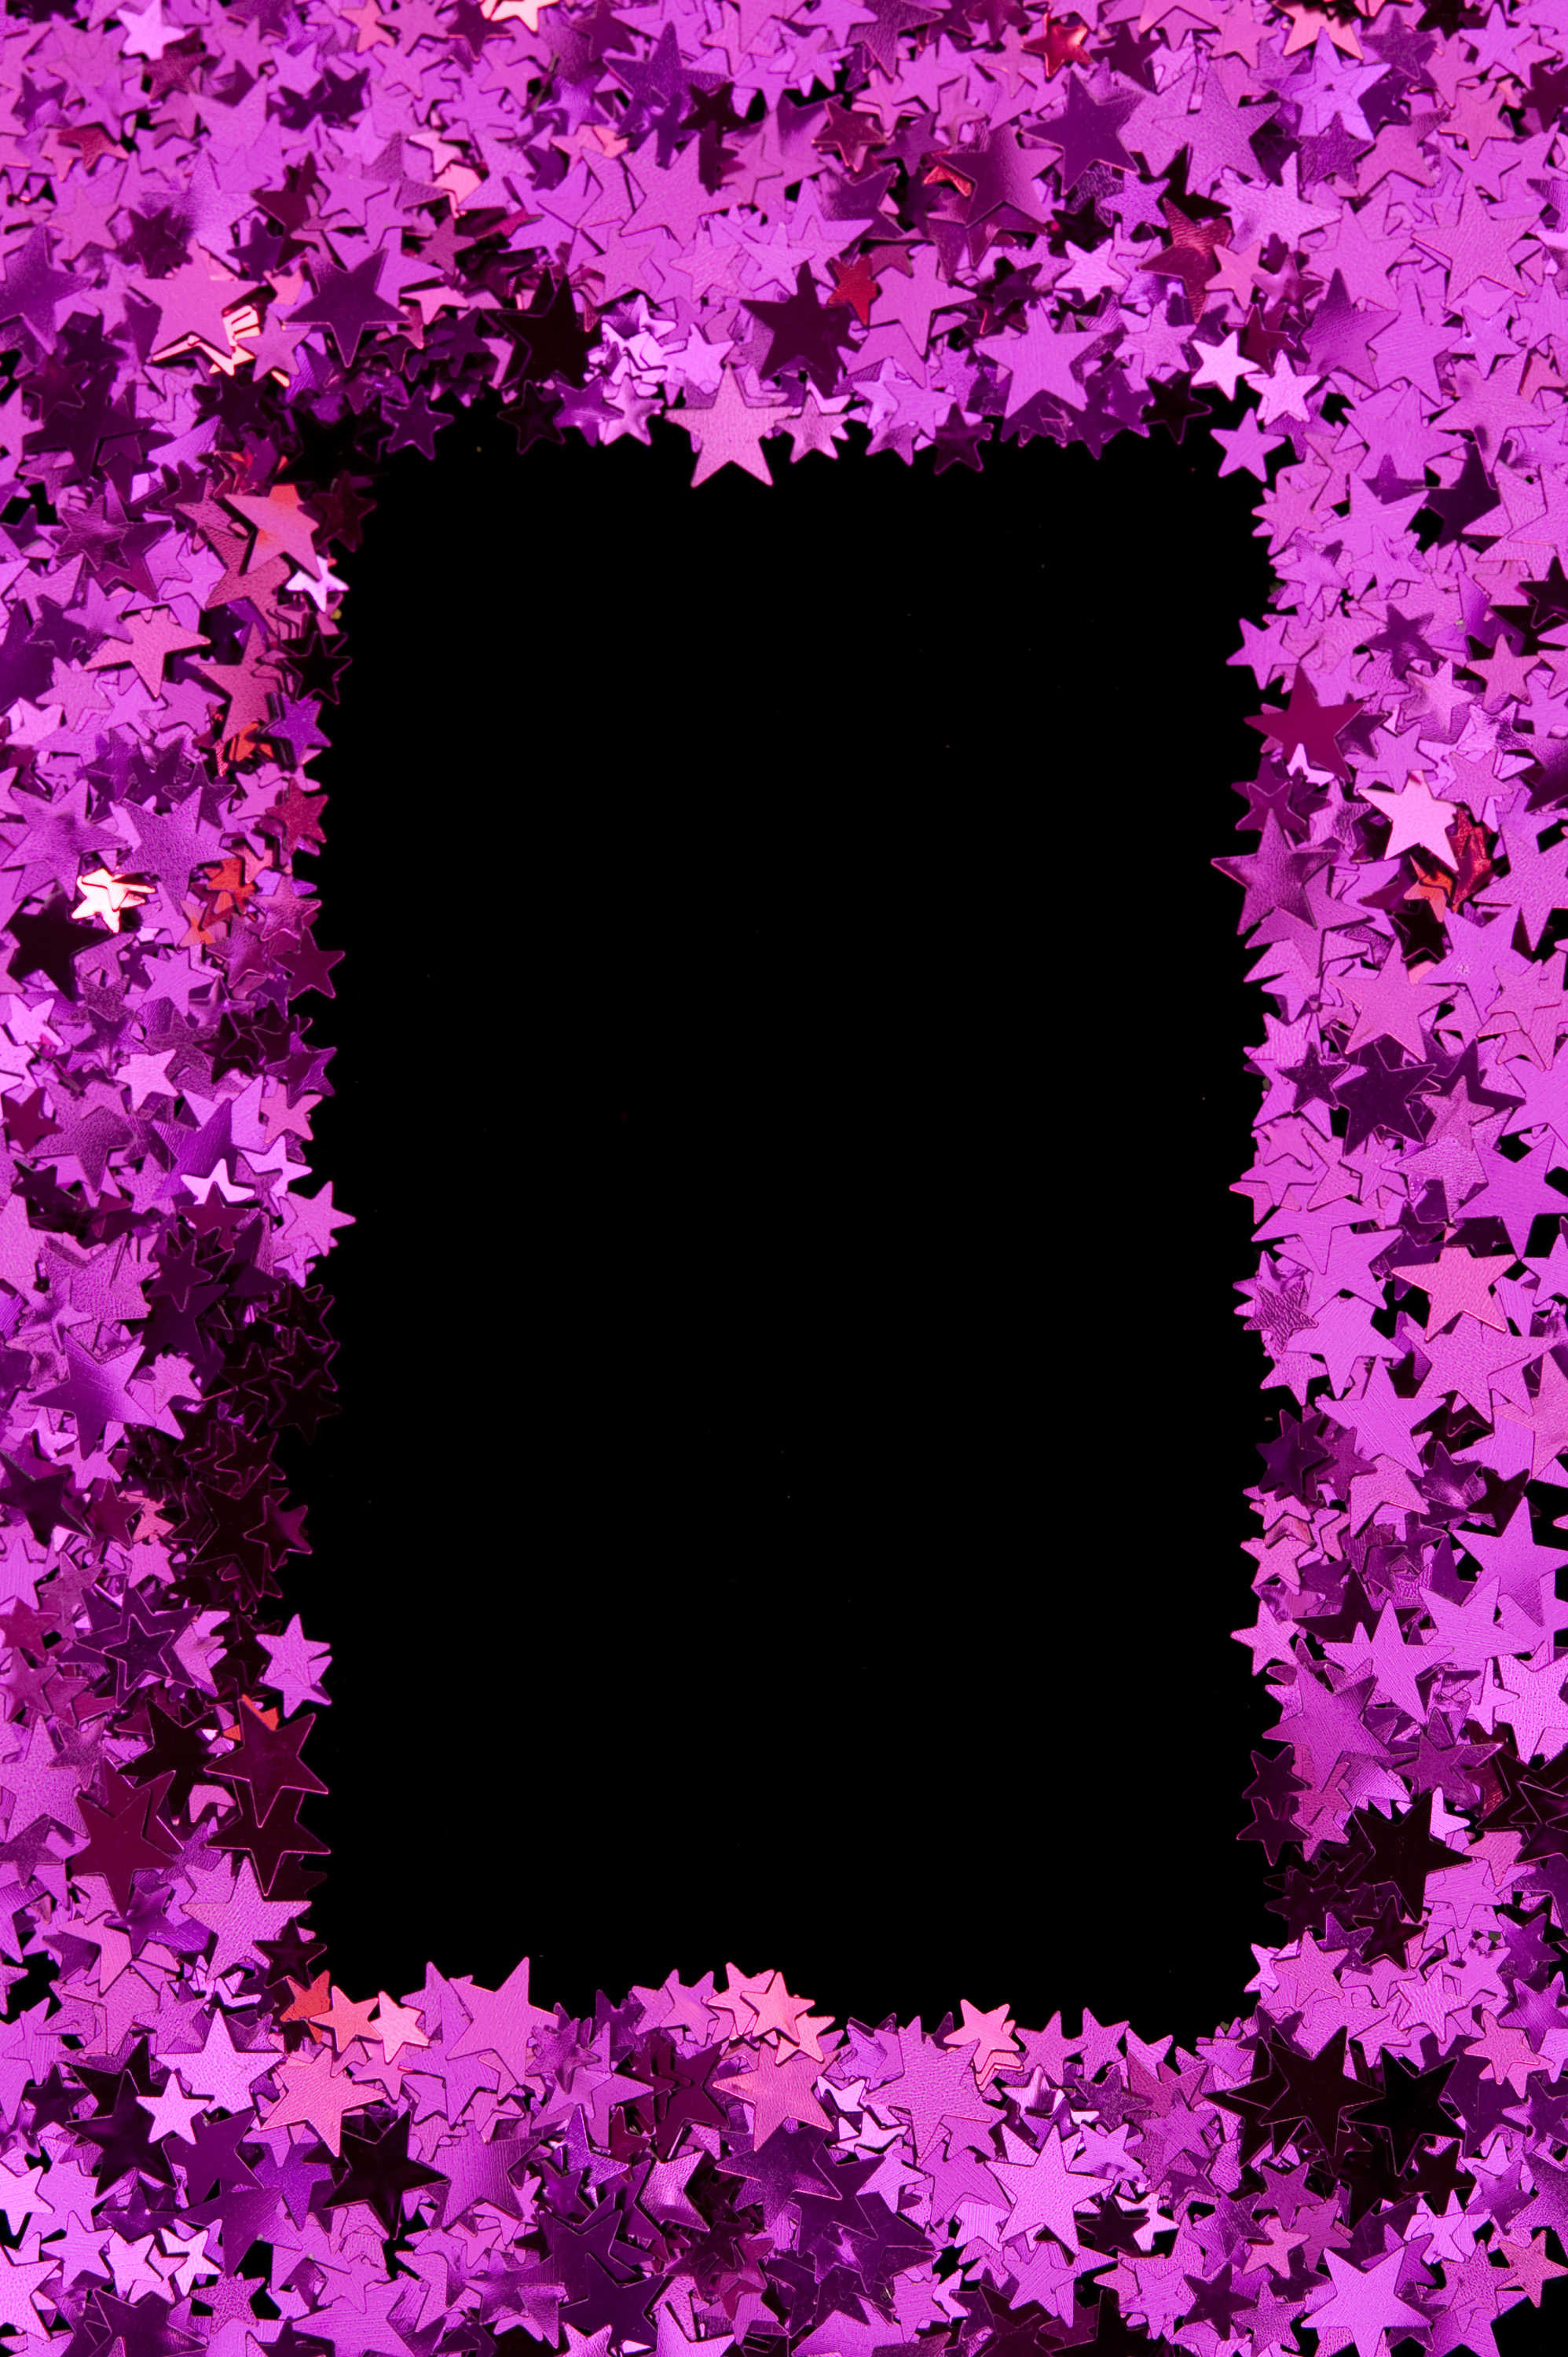 Pink Star Border and Frame